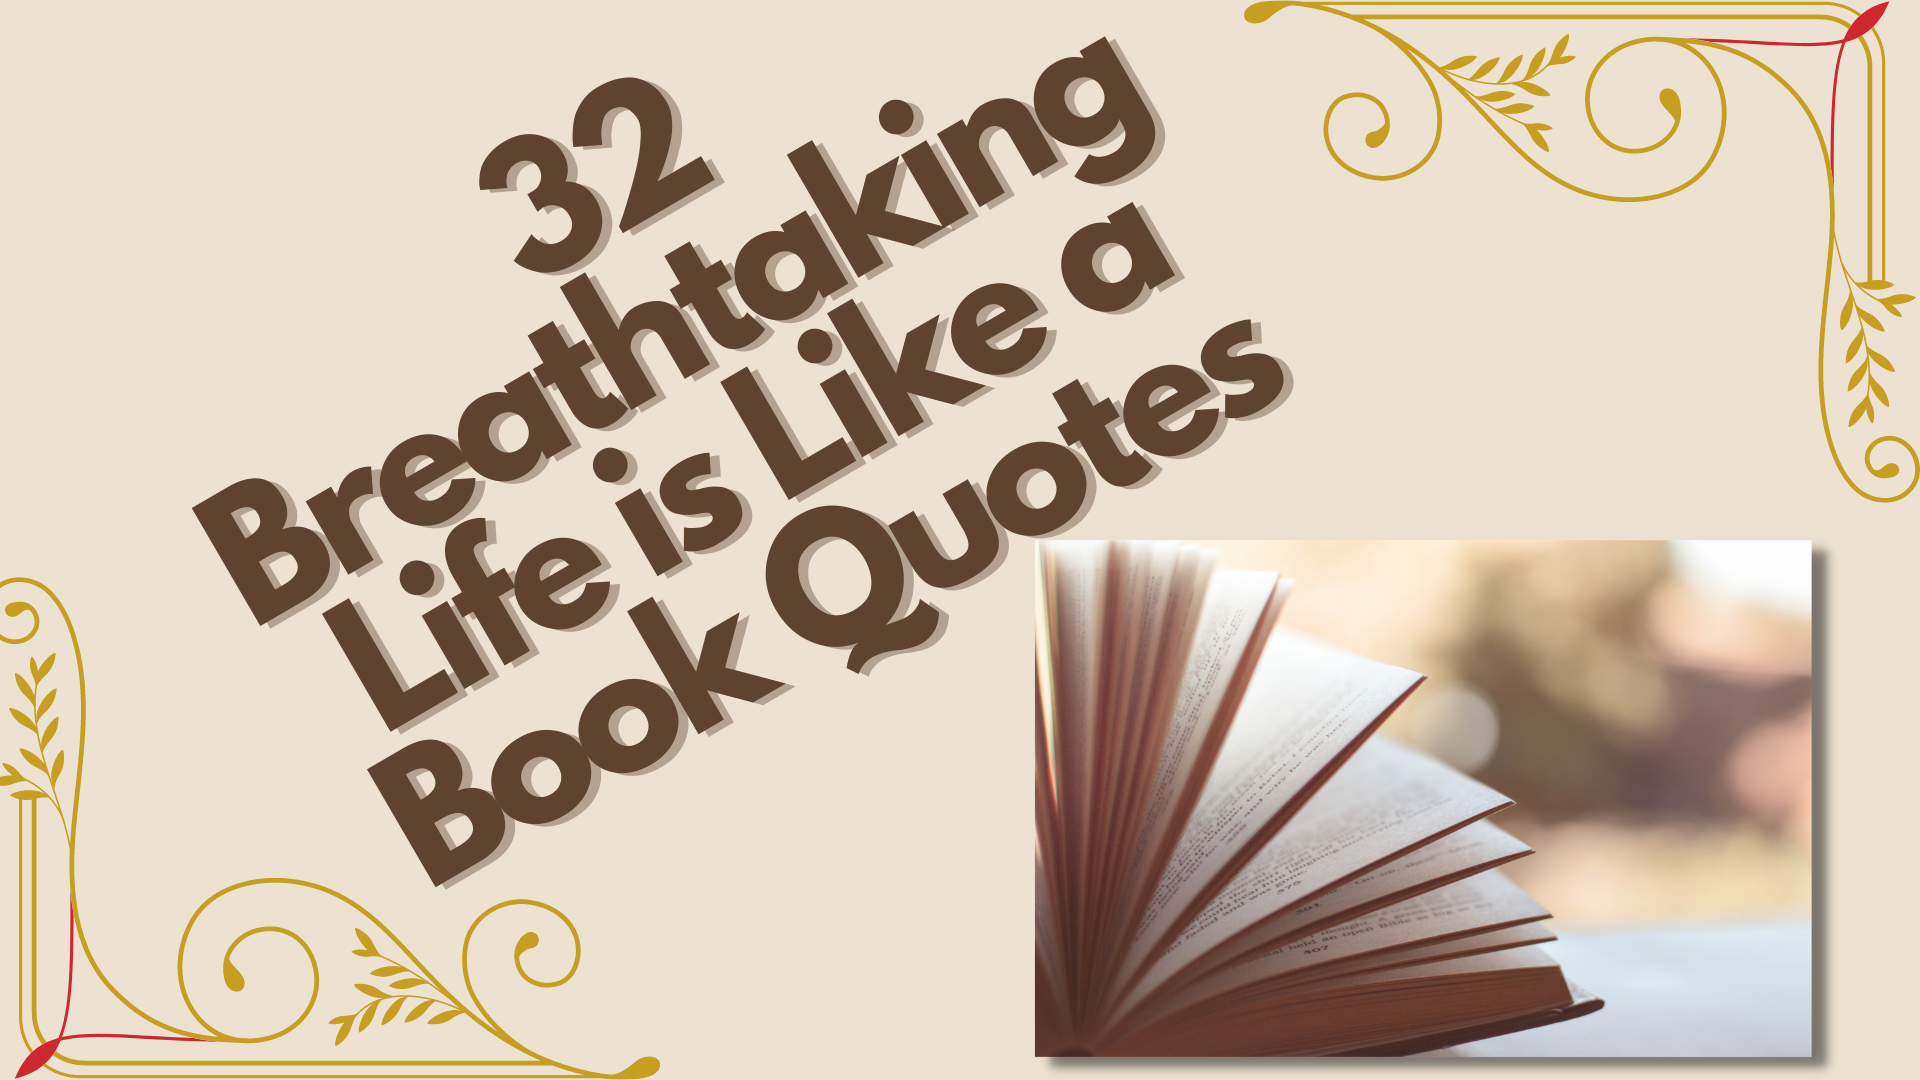 life is like a book quotes